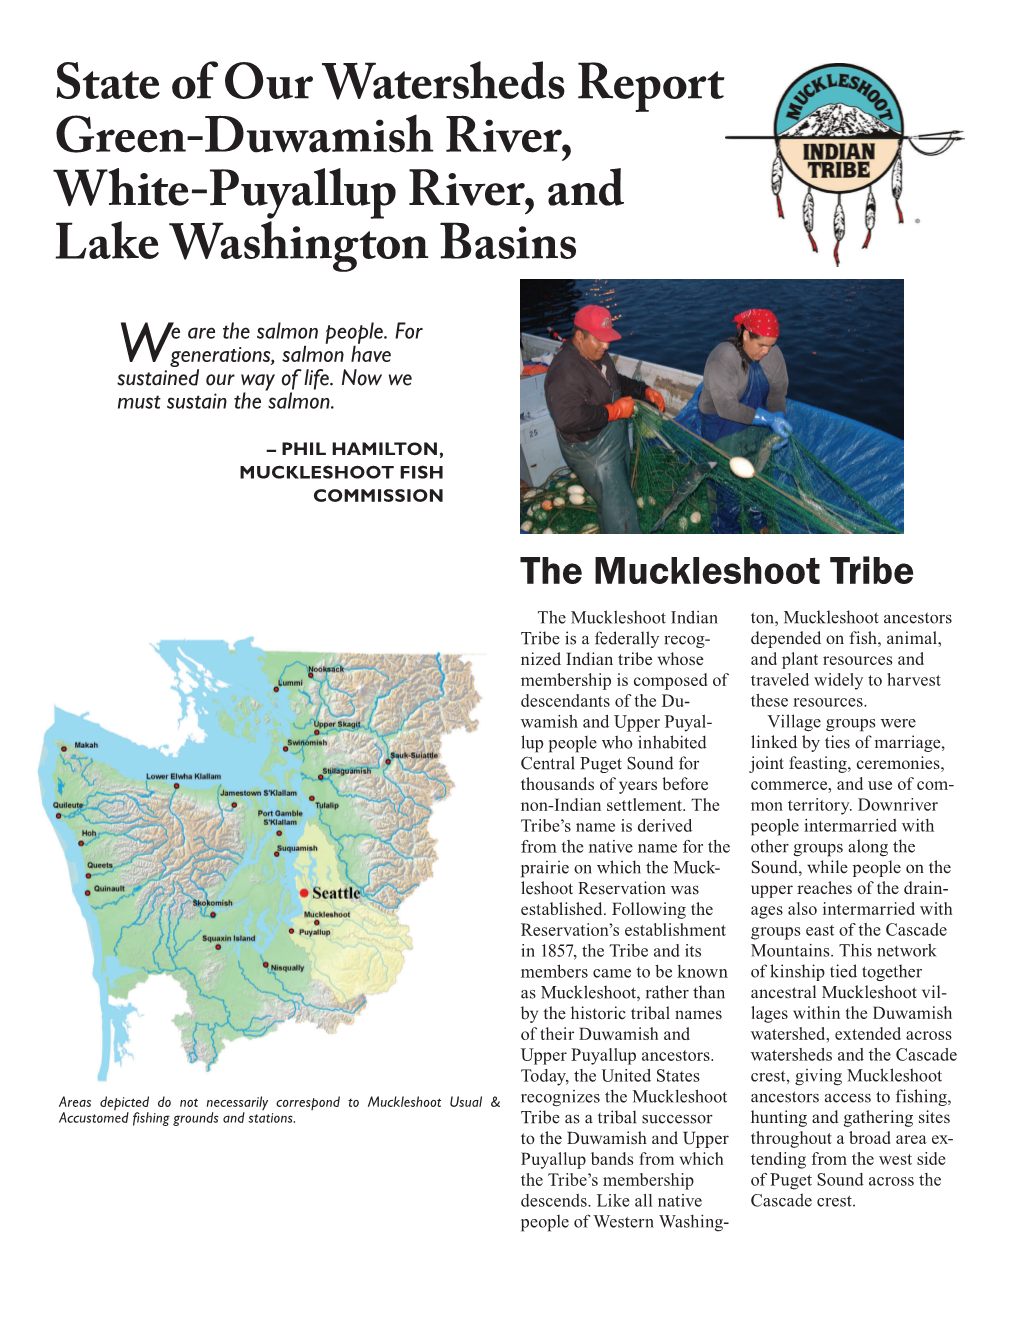 State of Our Watersheds Report Green-Duwamish River, White-Puyallup River, and Lake Washington Basins